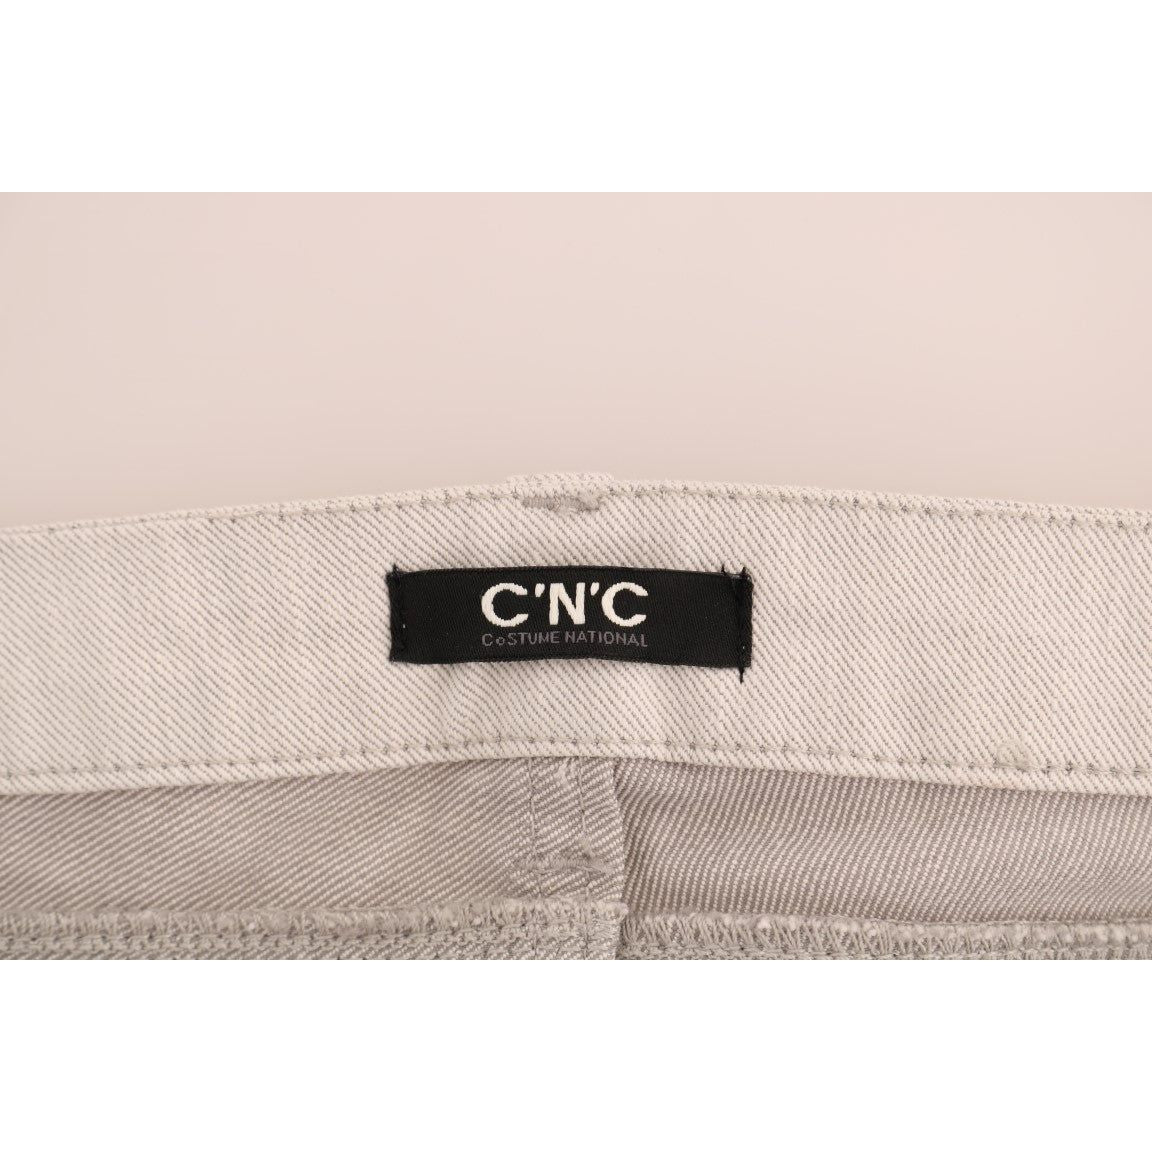 Costume National Chic White Slim-Fit Stretch Jeans white-cotton-stretch-slim-jeans